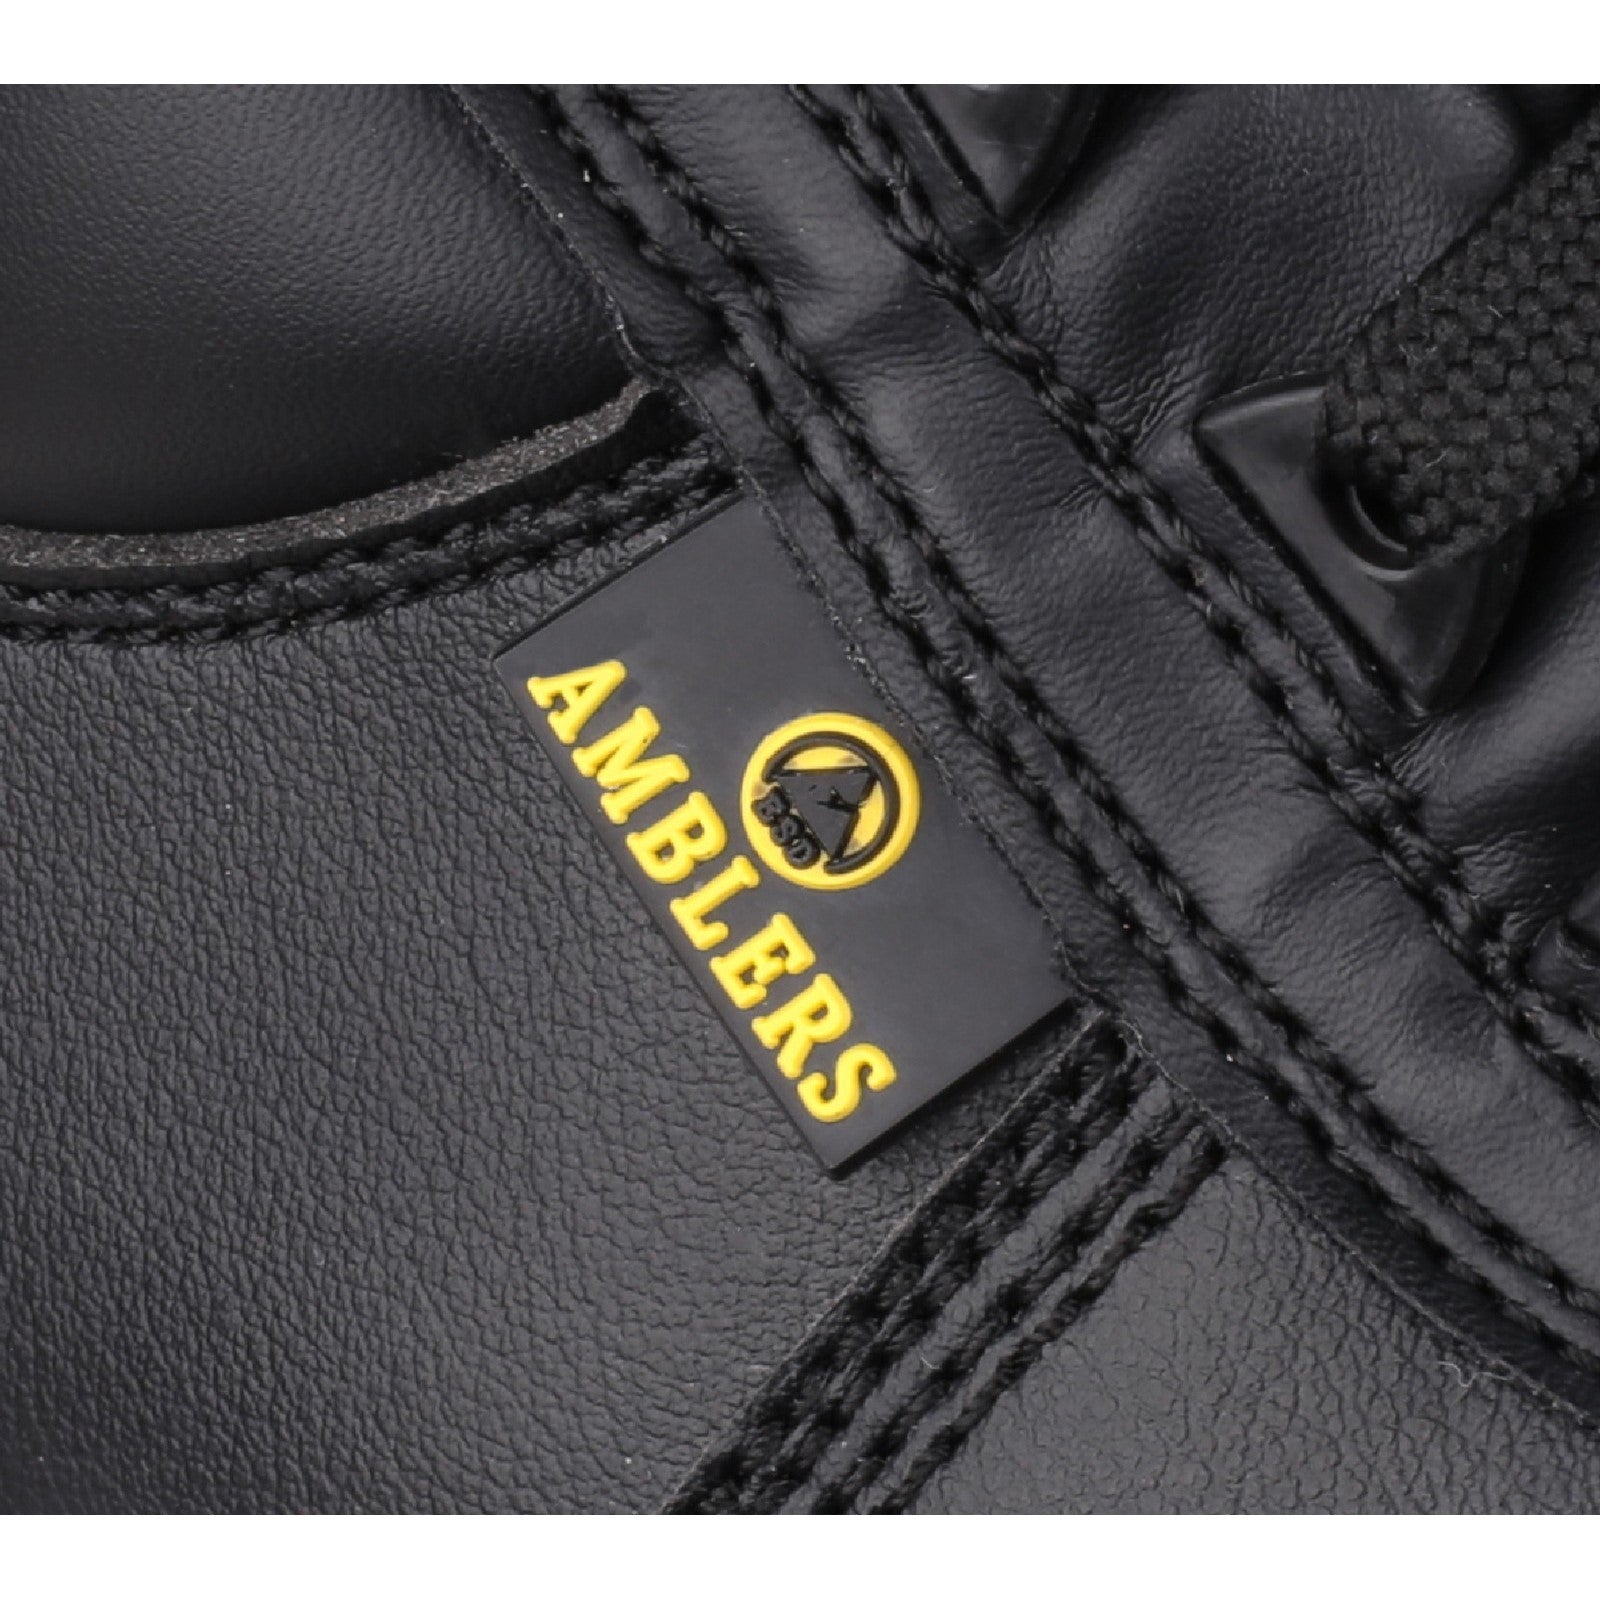 Amblers FS663 Safety Boot